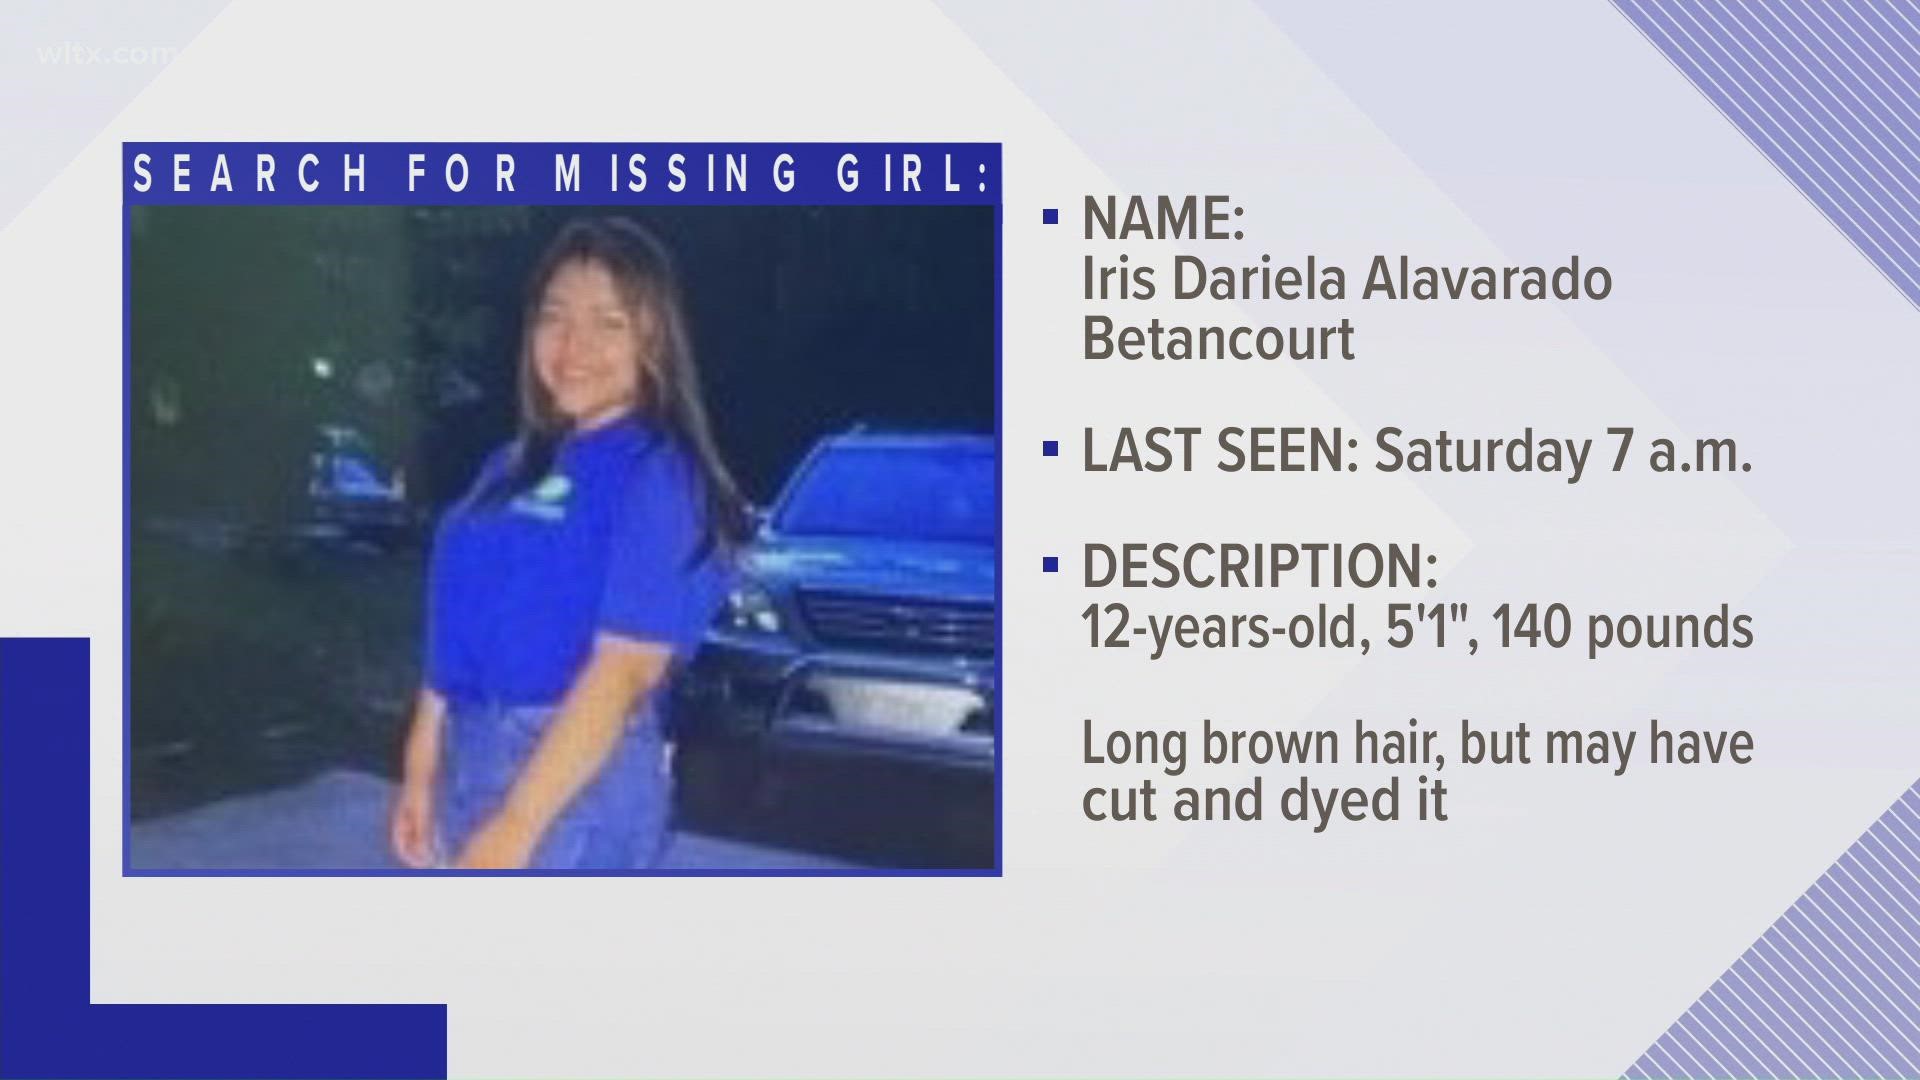 The Lancaster County Sheriff’s Office is asking for the public's help to find a missing 12-year-old last seen Nov. 19, who may be headed to the northeastern U.S.